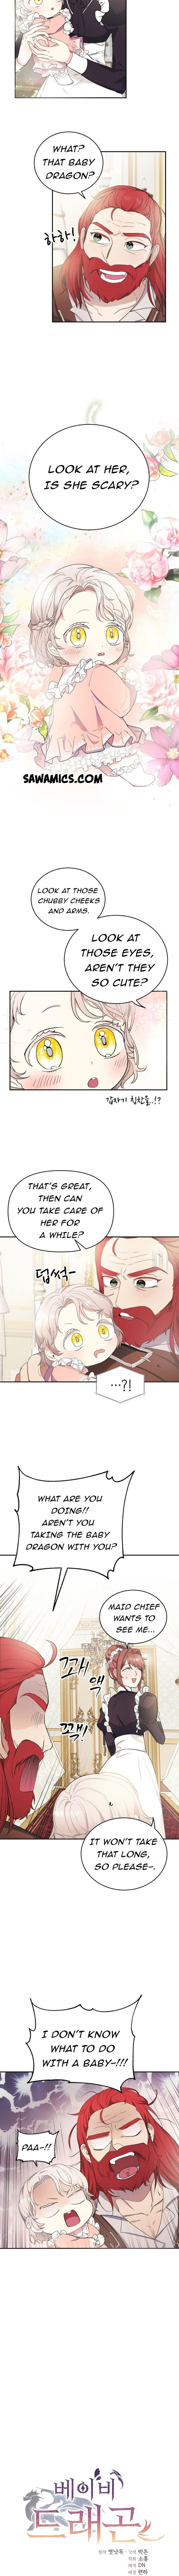 Baby Dragon chapter 6